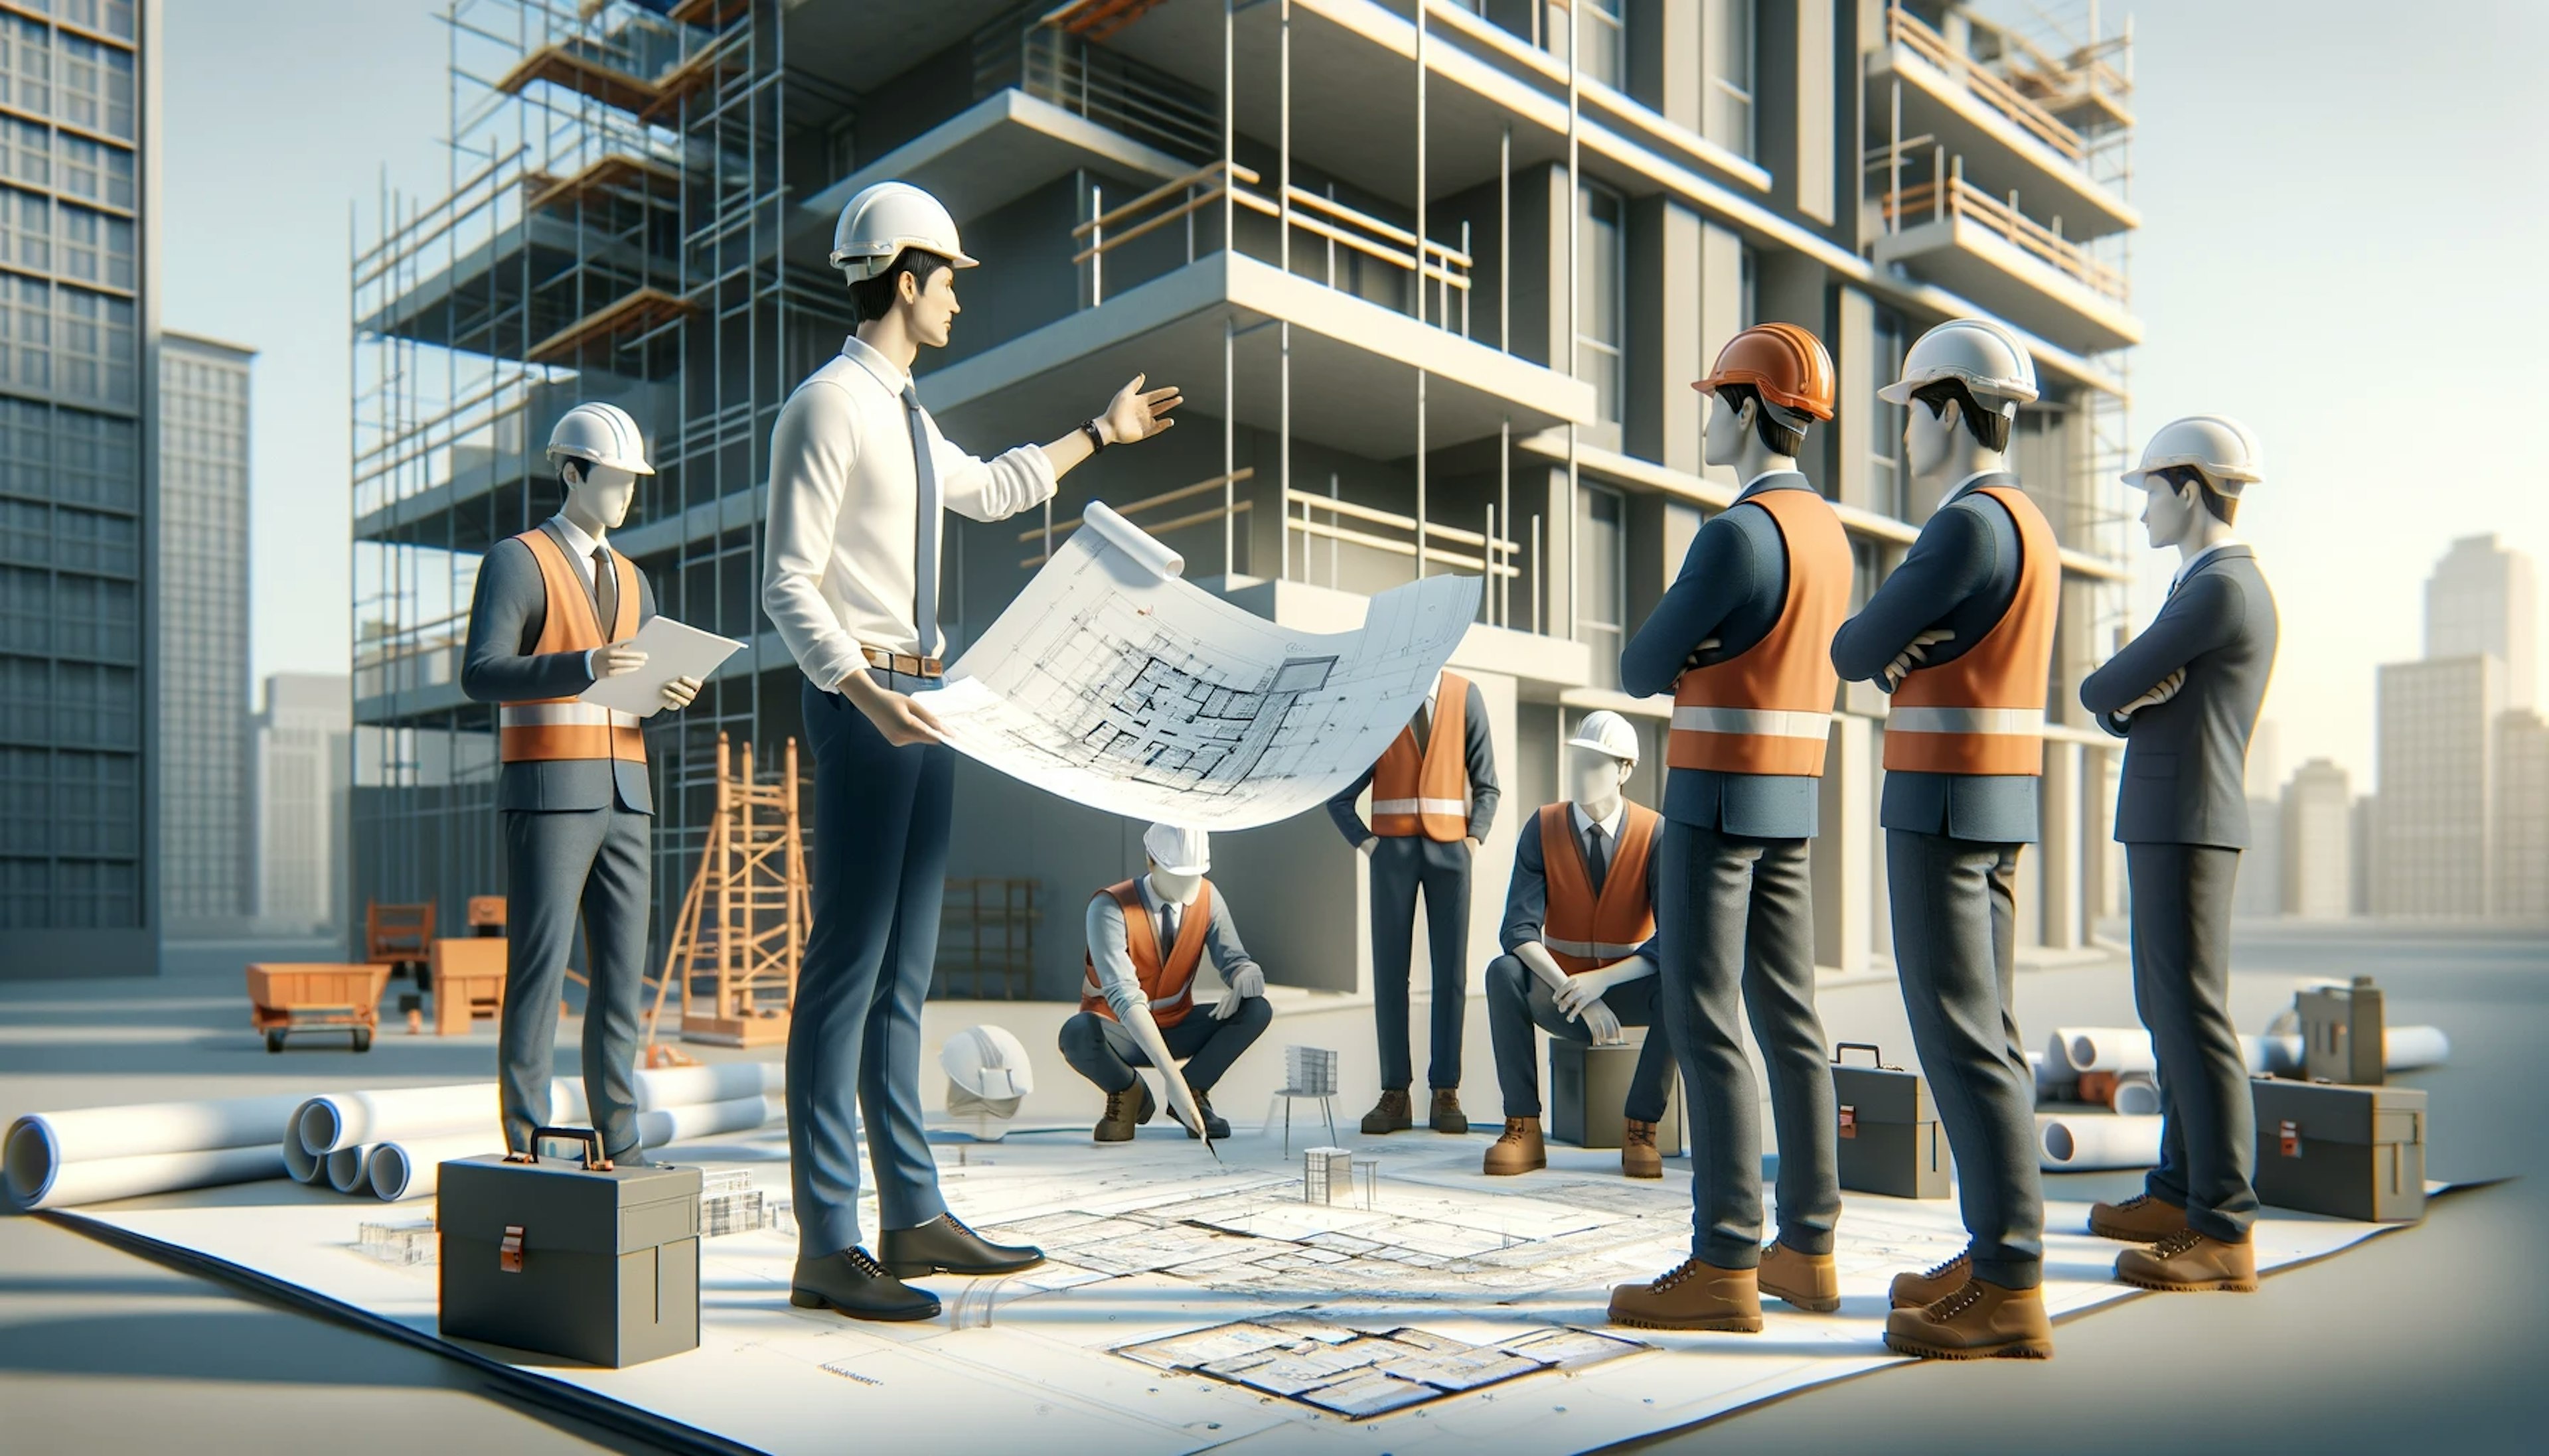 Architect explaining working drawings to a group of construction workers